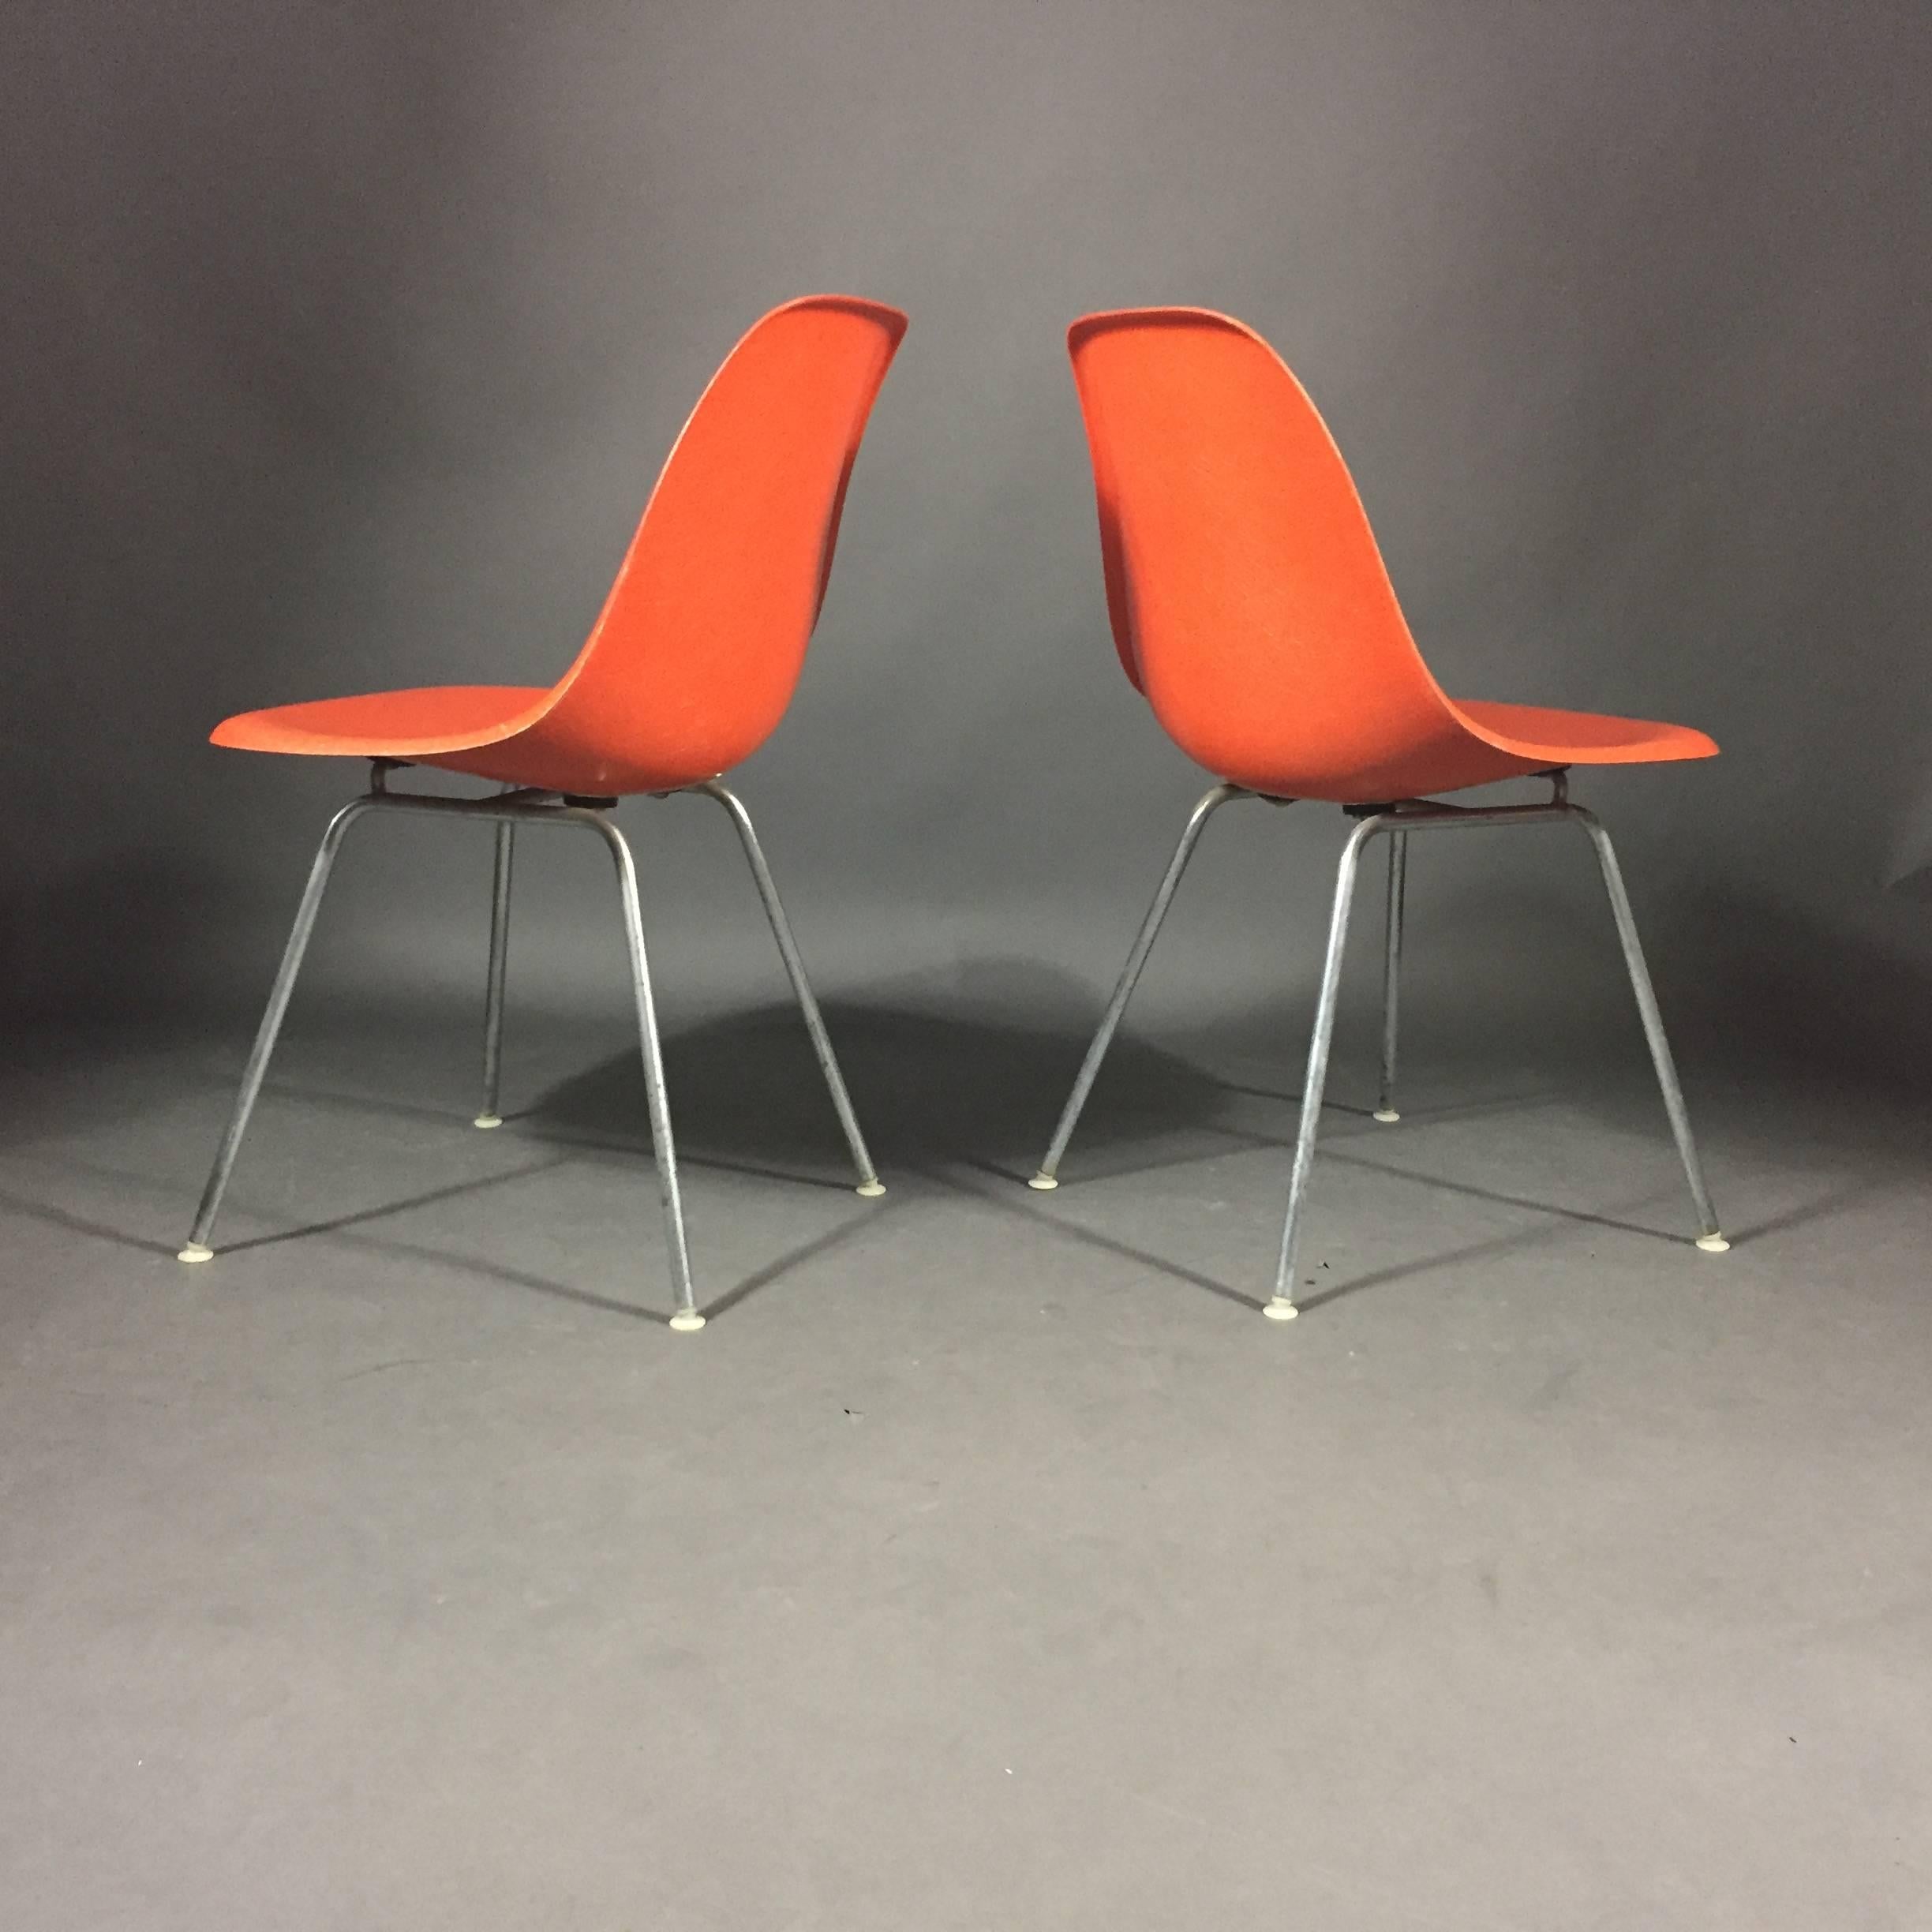 Mid-Century Modern Eames Orange Shell Chair, Herman Miller, Eight Available, Late 1960s